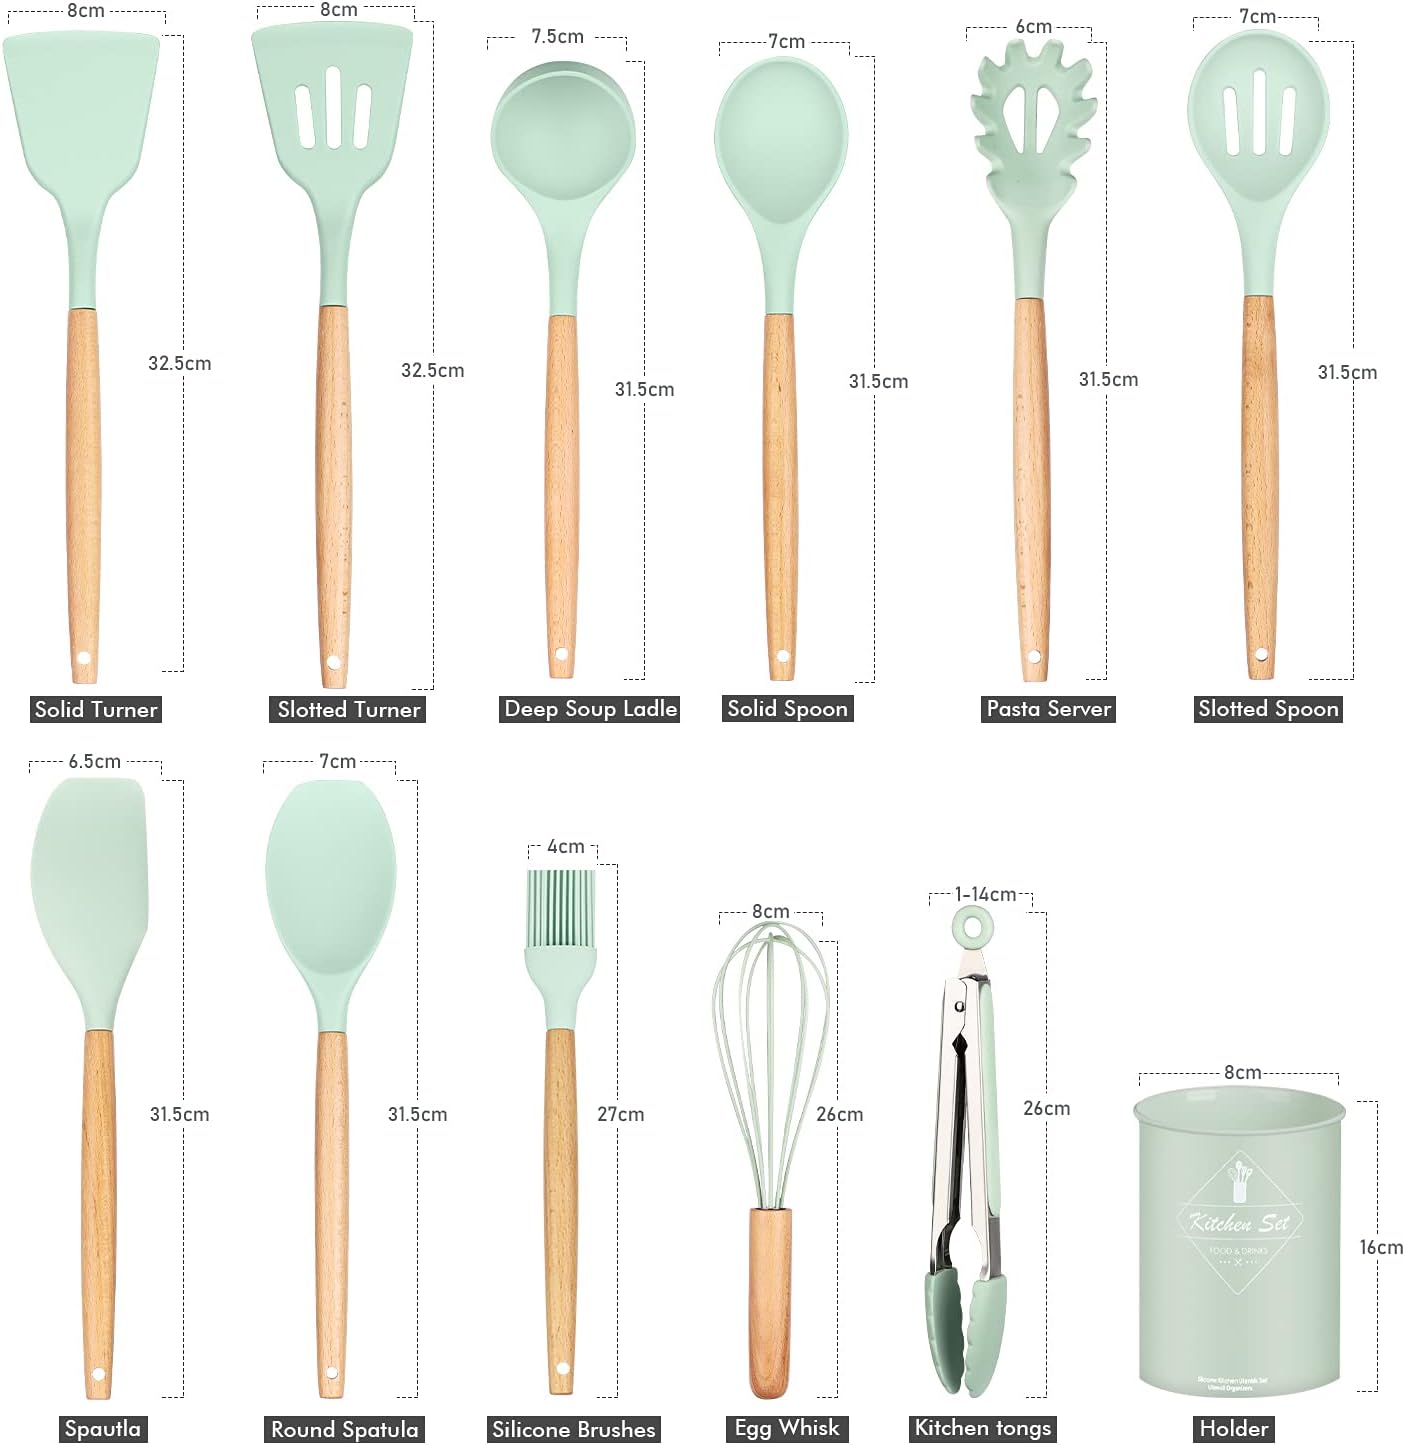 Vivaio Silicone Cooking Utensil Set with Wooden Handles and Holder, 12 Pieces - Mint Green